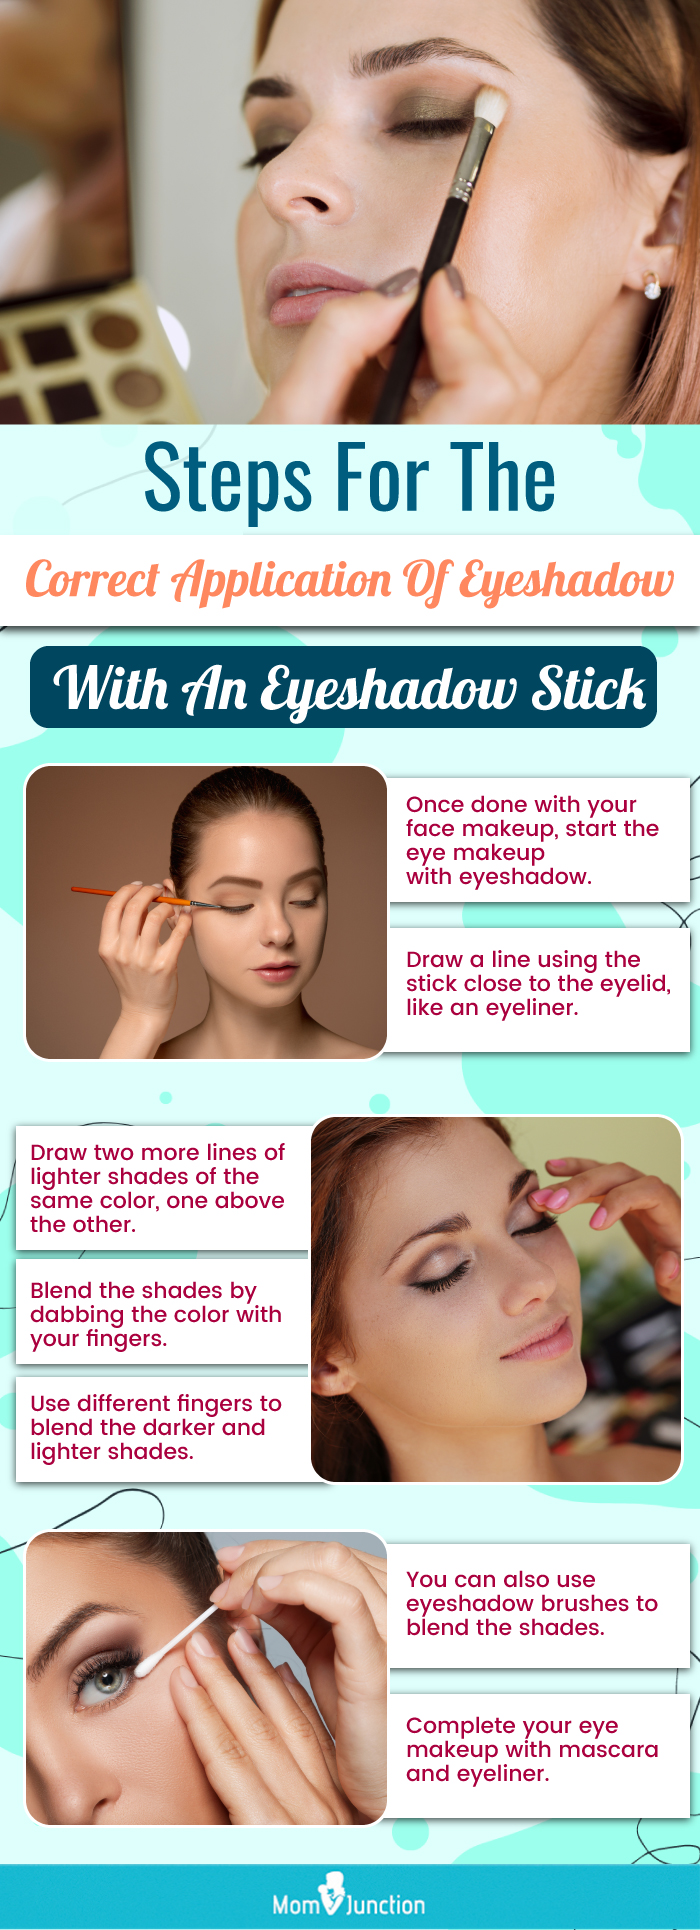 Steps For The Correct Application Of Eyeshadow With An Eyeshadow Stick (infographic)